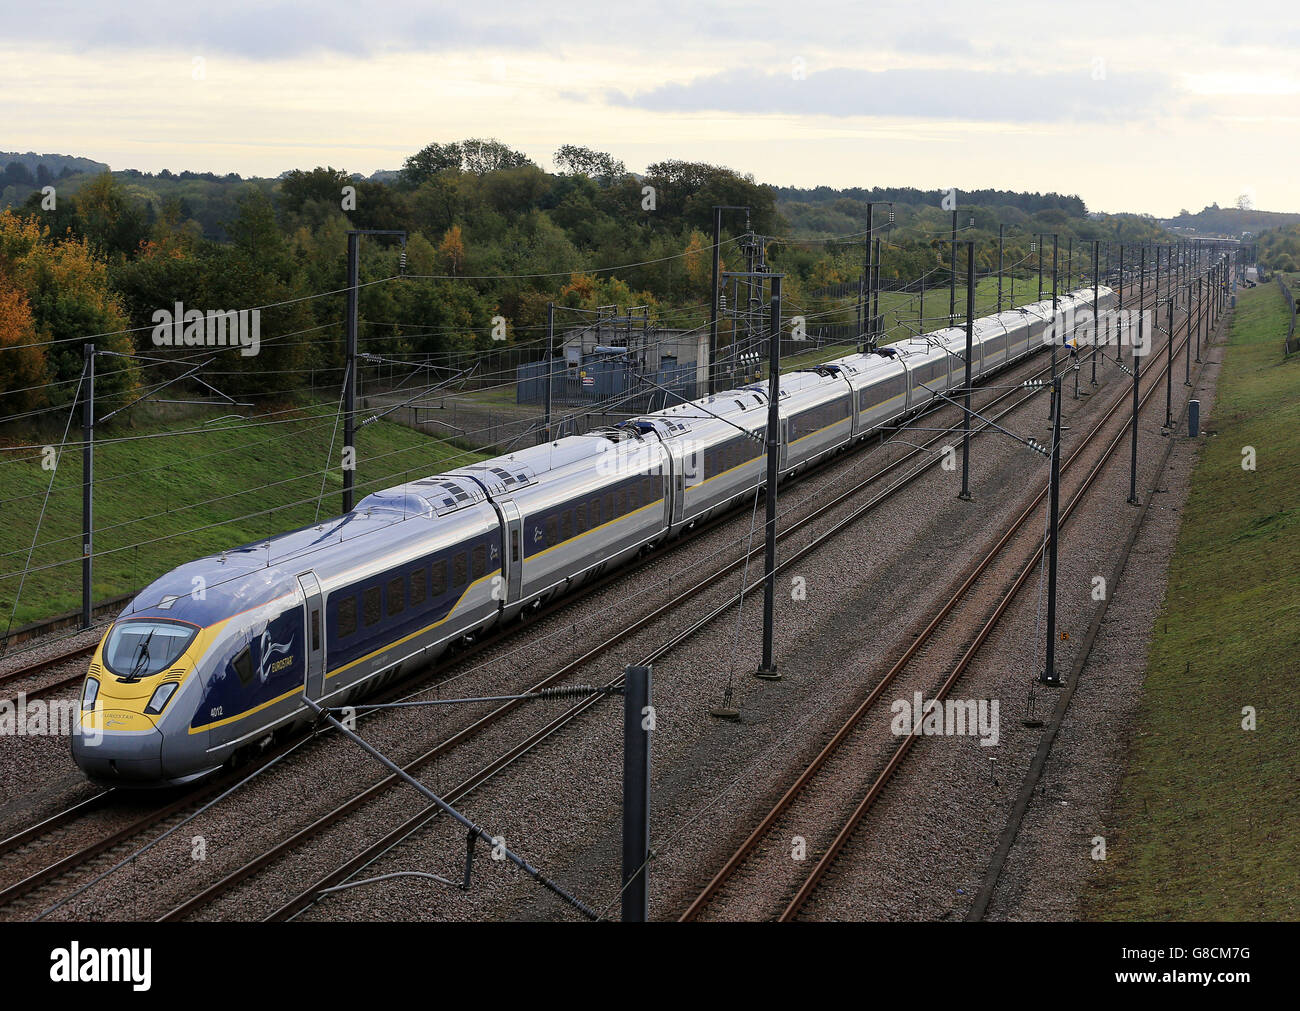 A brand new Eurostar e320 (Class 374) high speed train passes through Kent during a programme of testing on the High Speed 1 railway line before Eurostar introduces the new fleet of trains into service later this year. Stock Photo